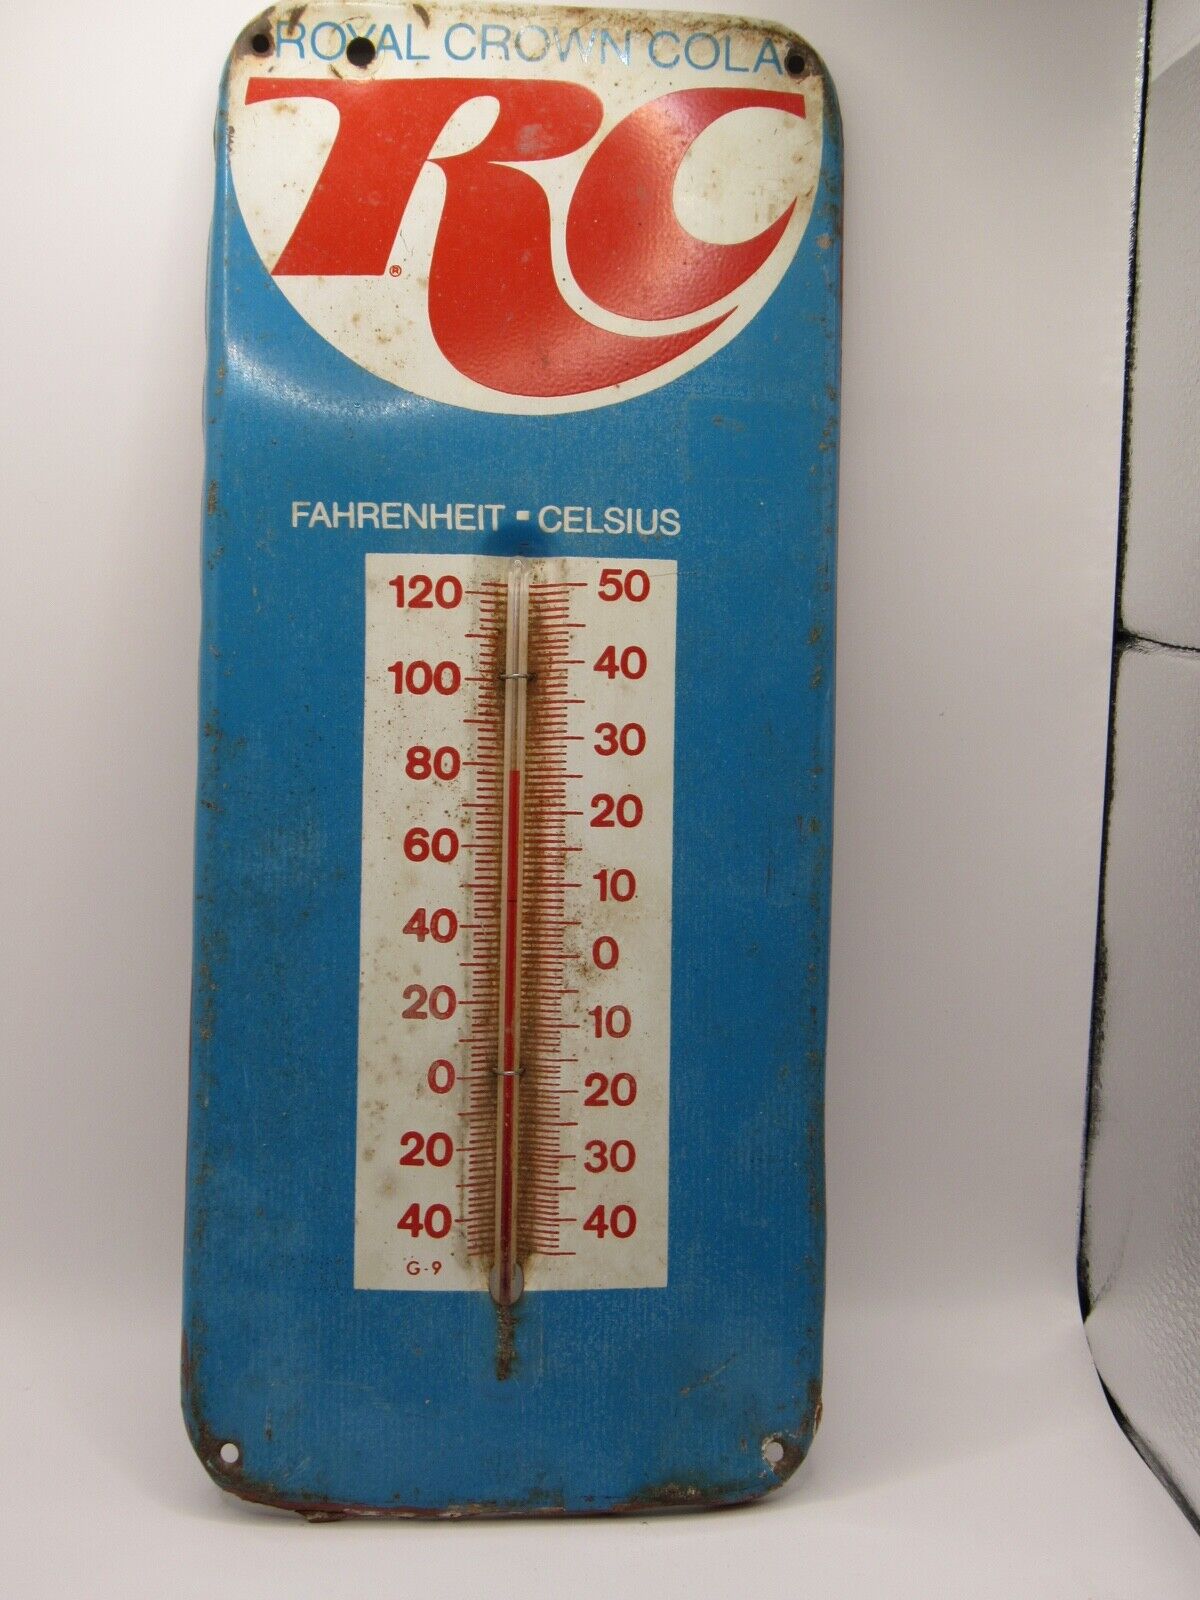 ROYAL CROWN COLA RC THERMOMETER Rare Old Advertising Sign